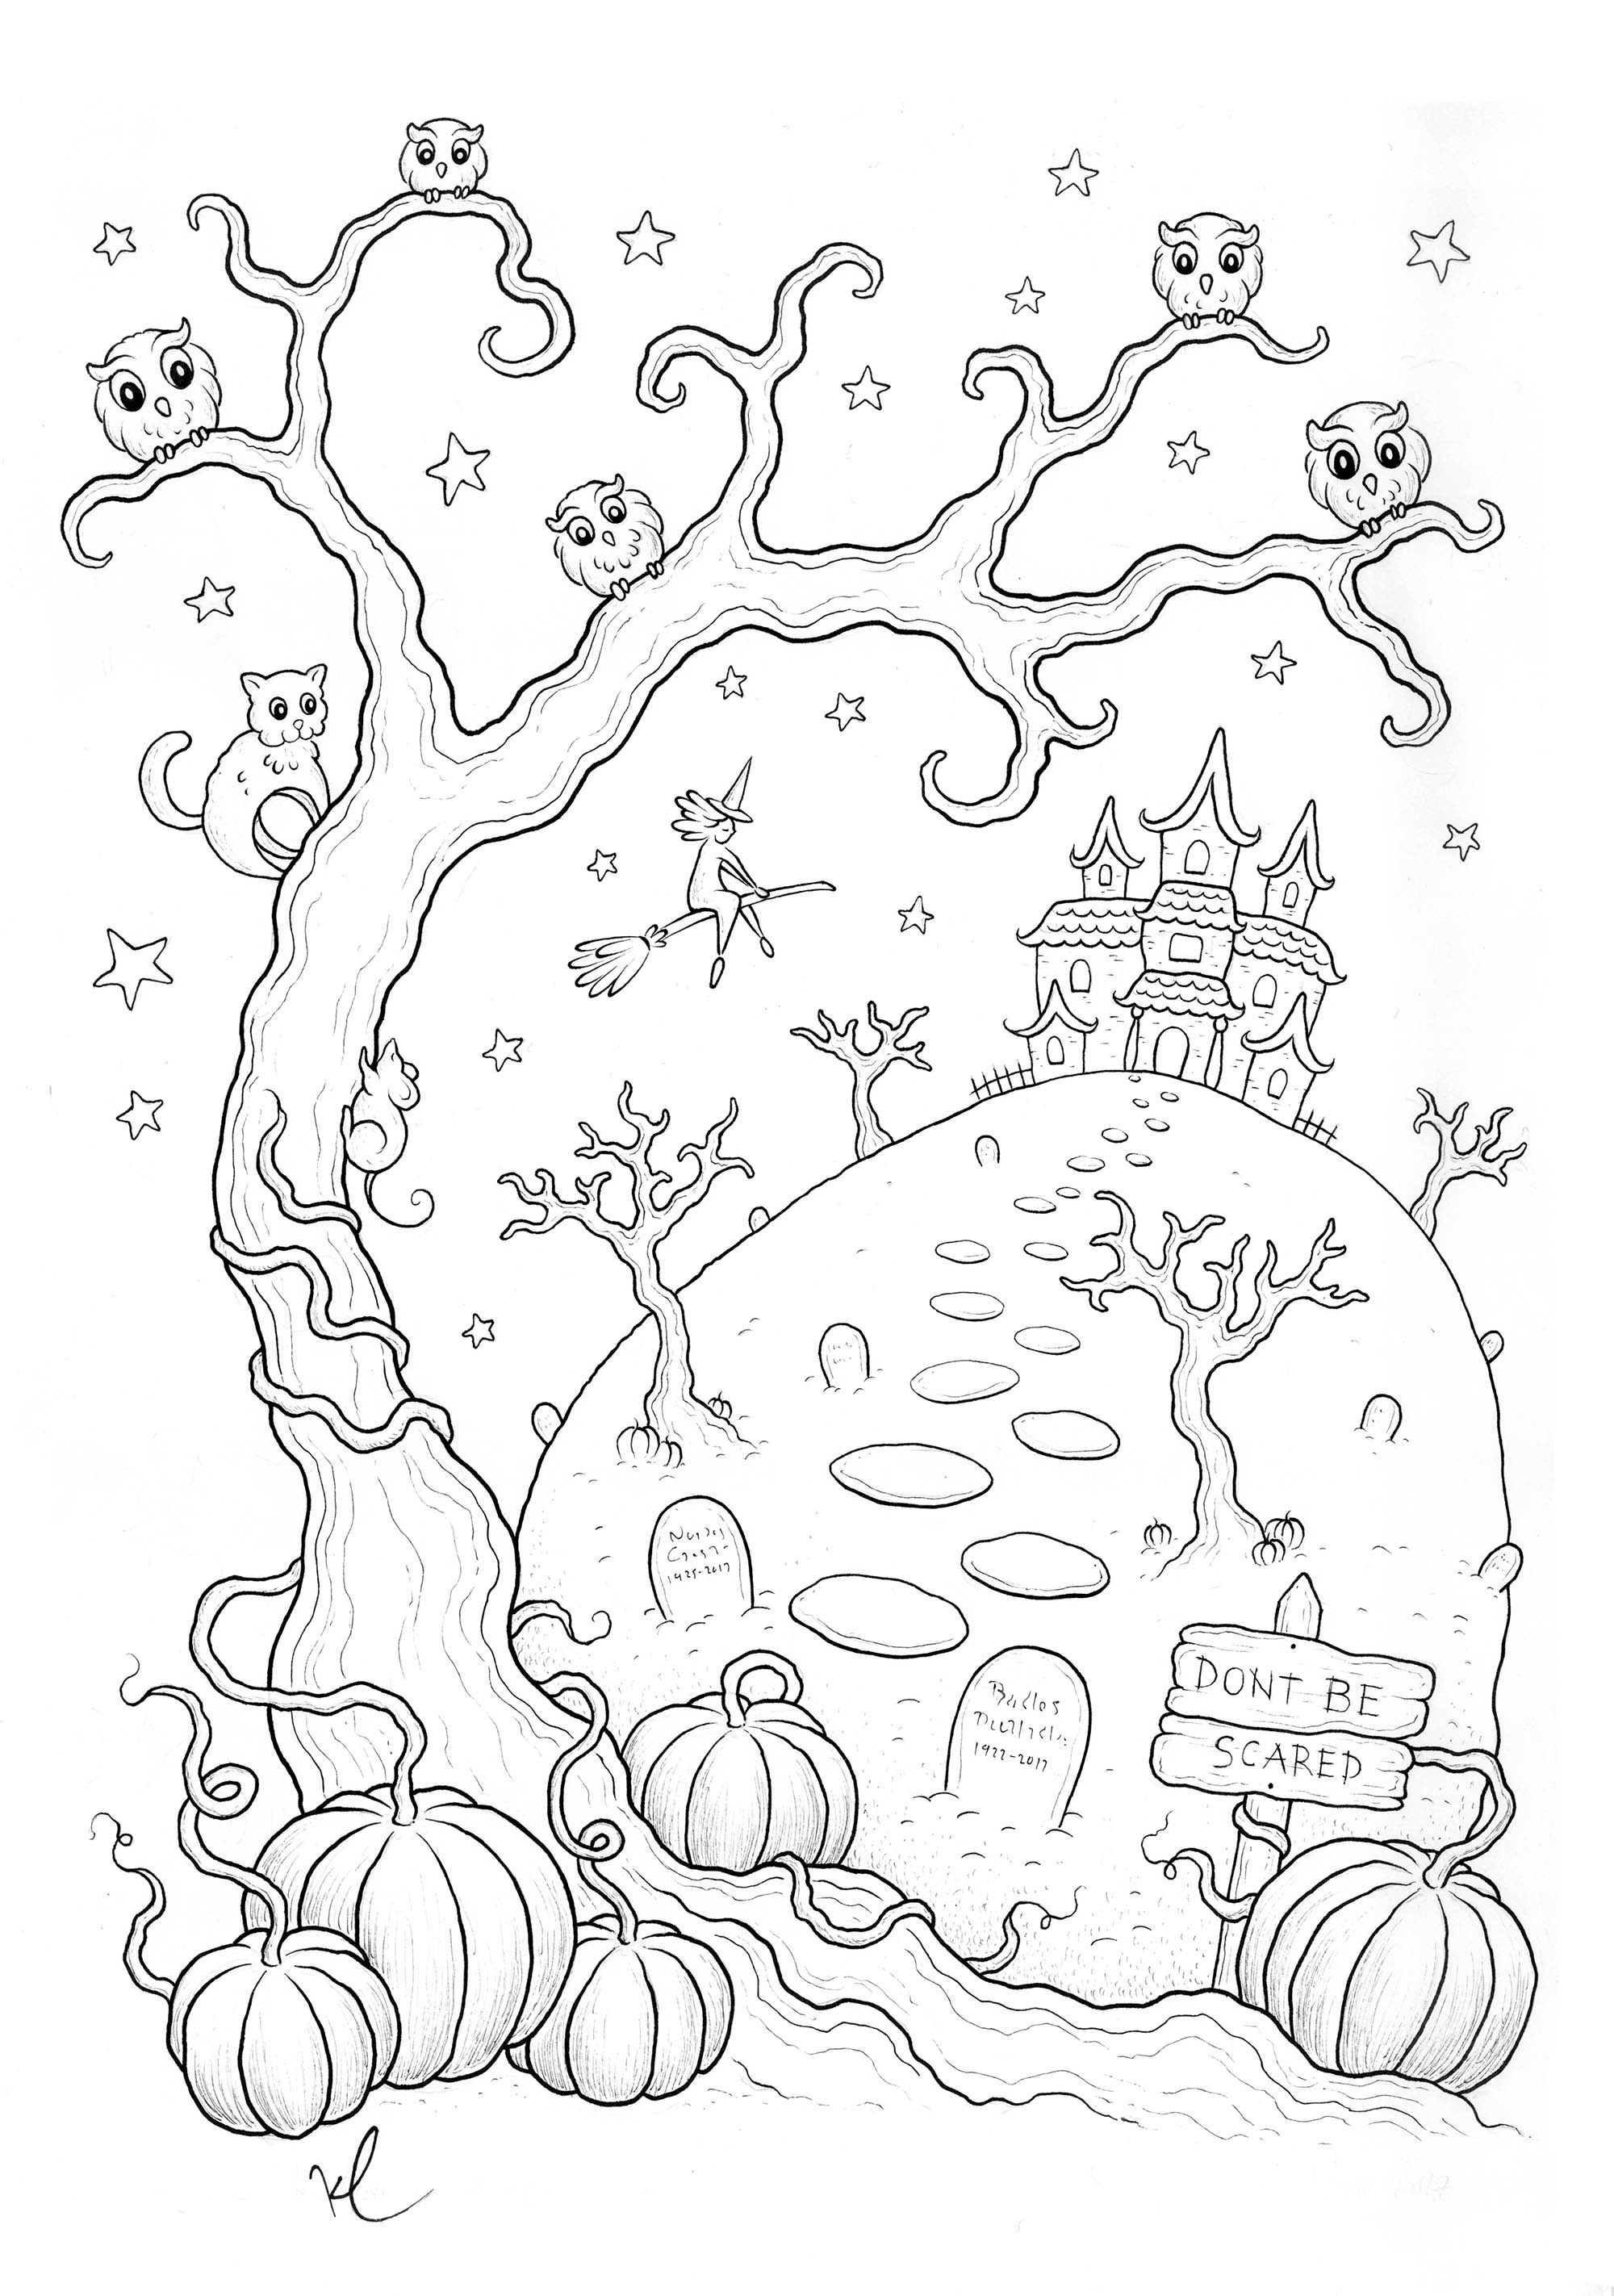 Halloween haunted house to color, by Konstantinos Liaramantzas. Designed by Konstantinos Liaramantzas, this coloring page represents a haunted house in a Halloween night landscape.The details are very fine, it will be a real pleasure to give life and colors to this drawing.